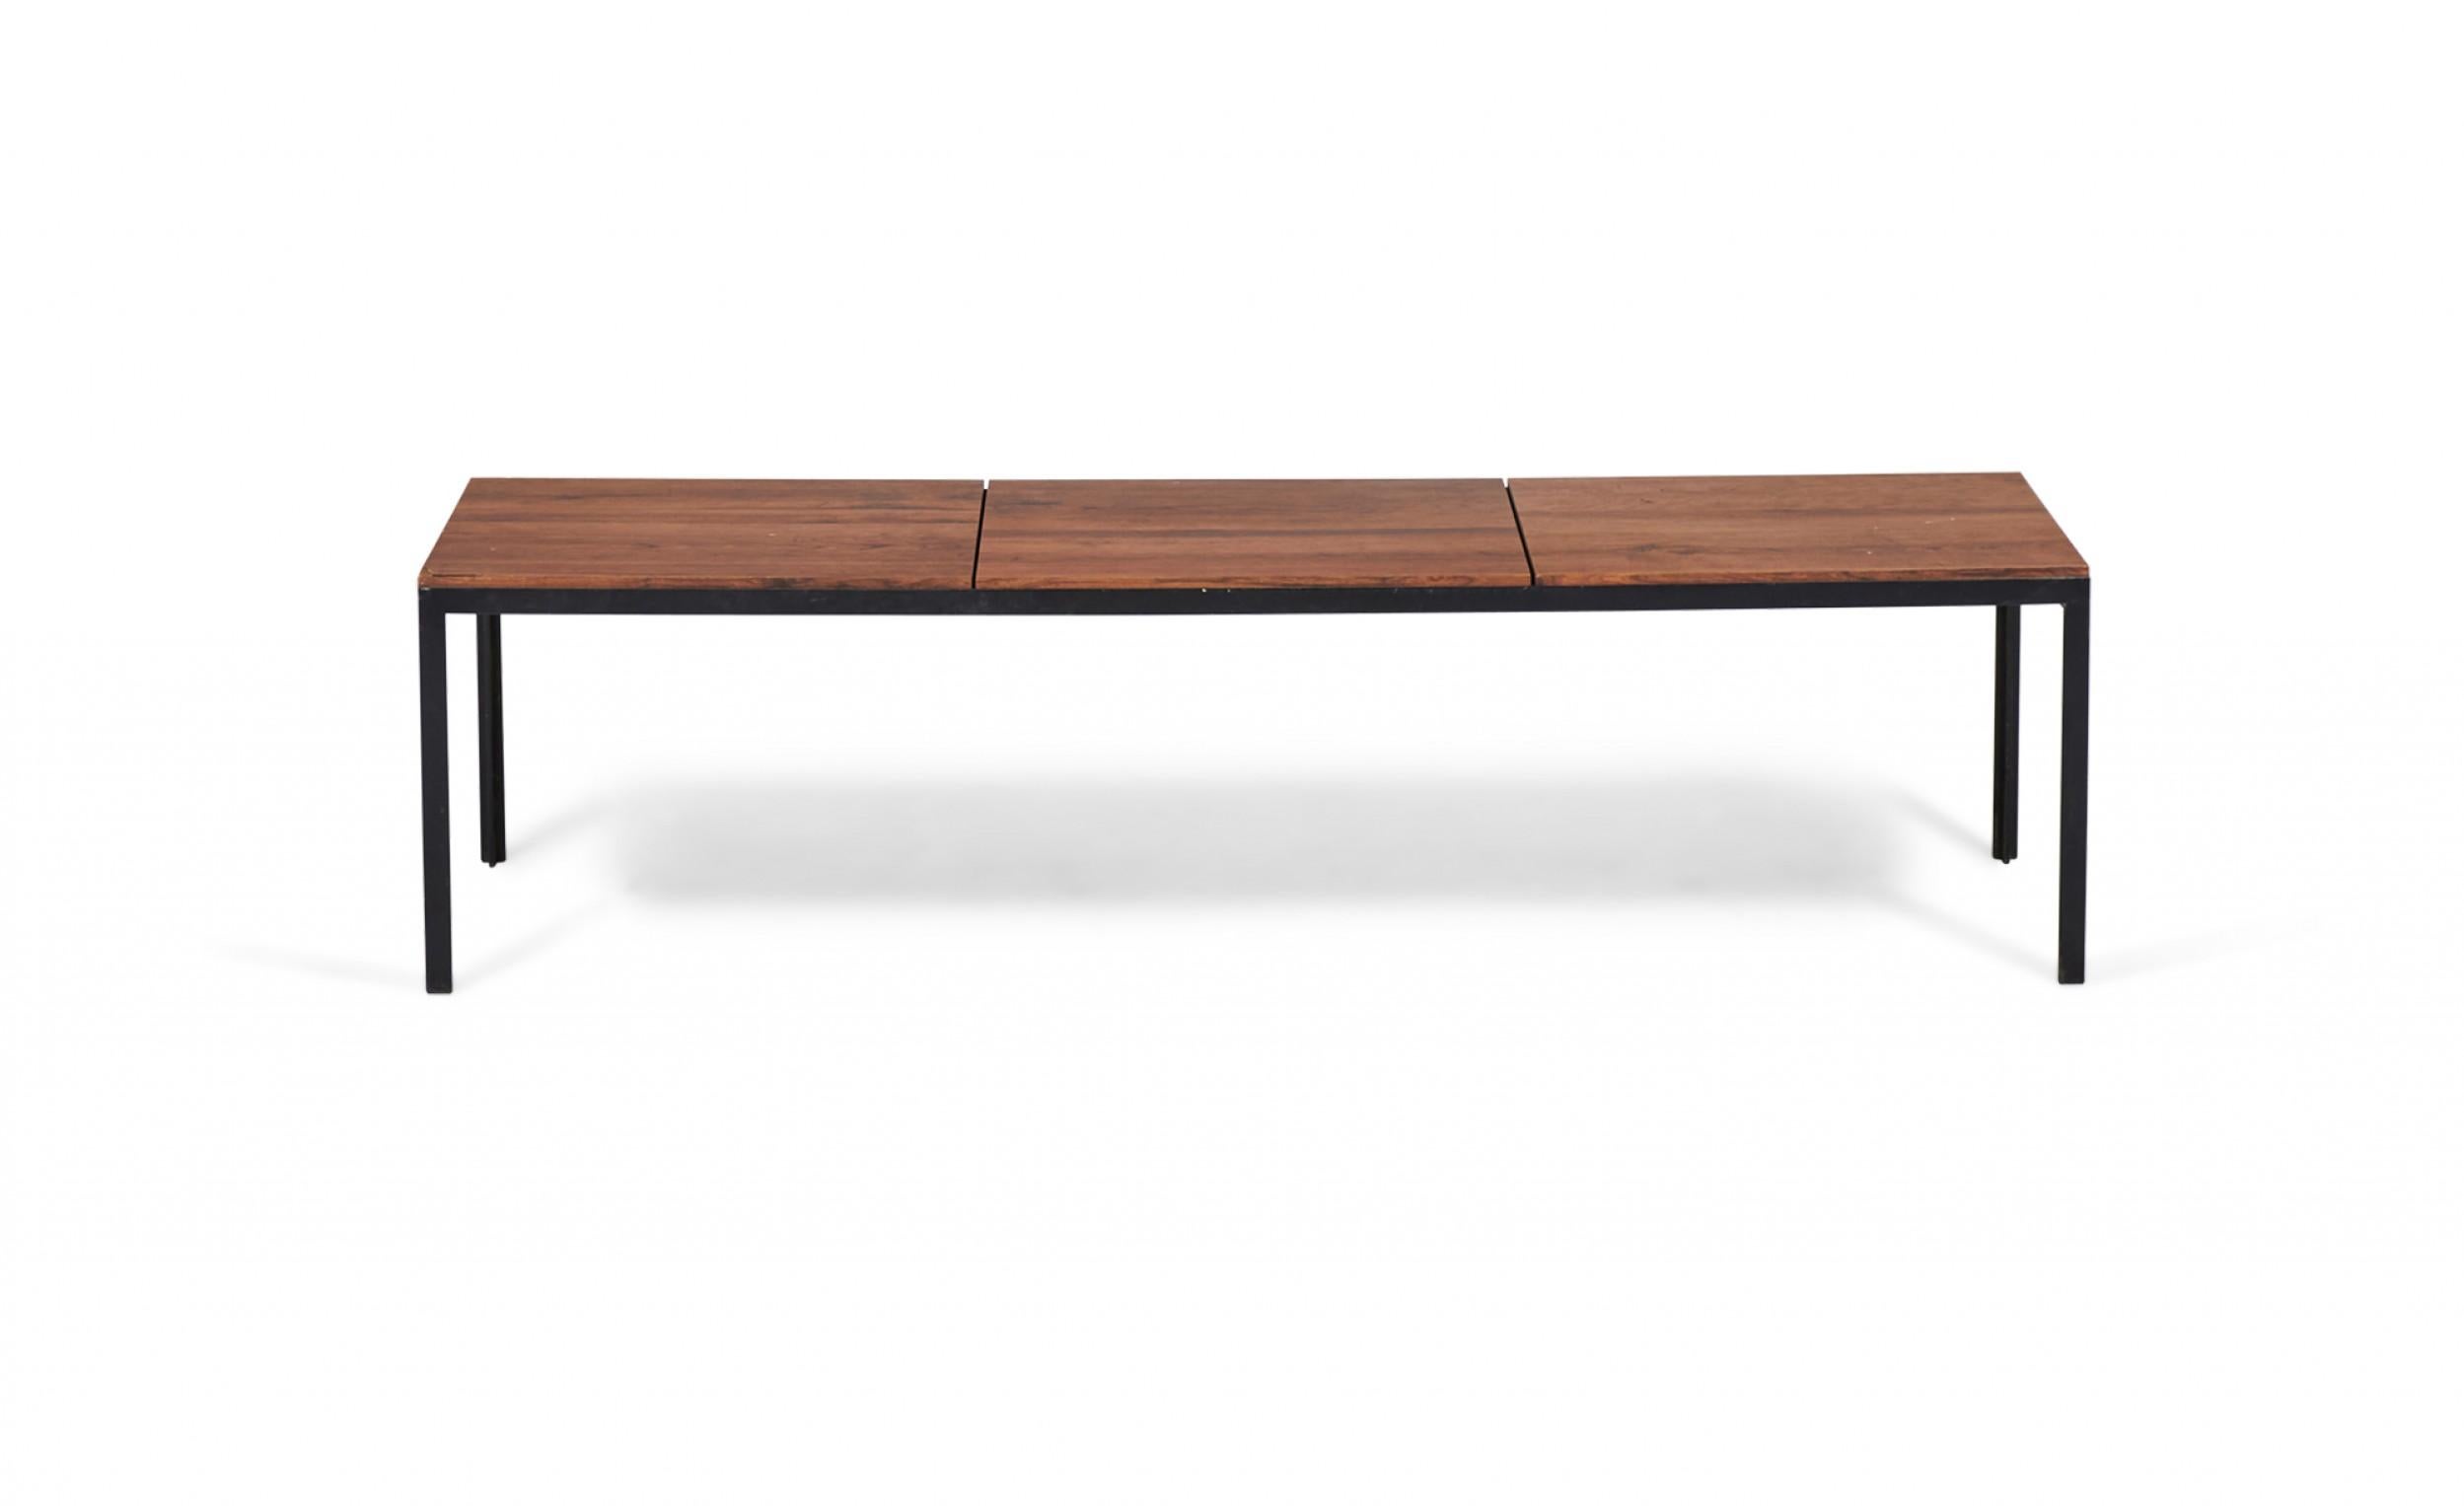 American Mid-Century rectangular coffee / cocktail table with a walnut laminate top in three sections supported on a T-shaped black metal base. (FLORENCE KNOLL)(Similar table: DUF0082).